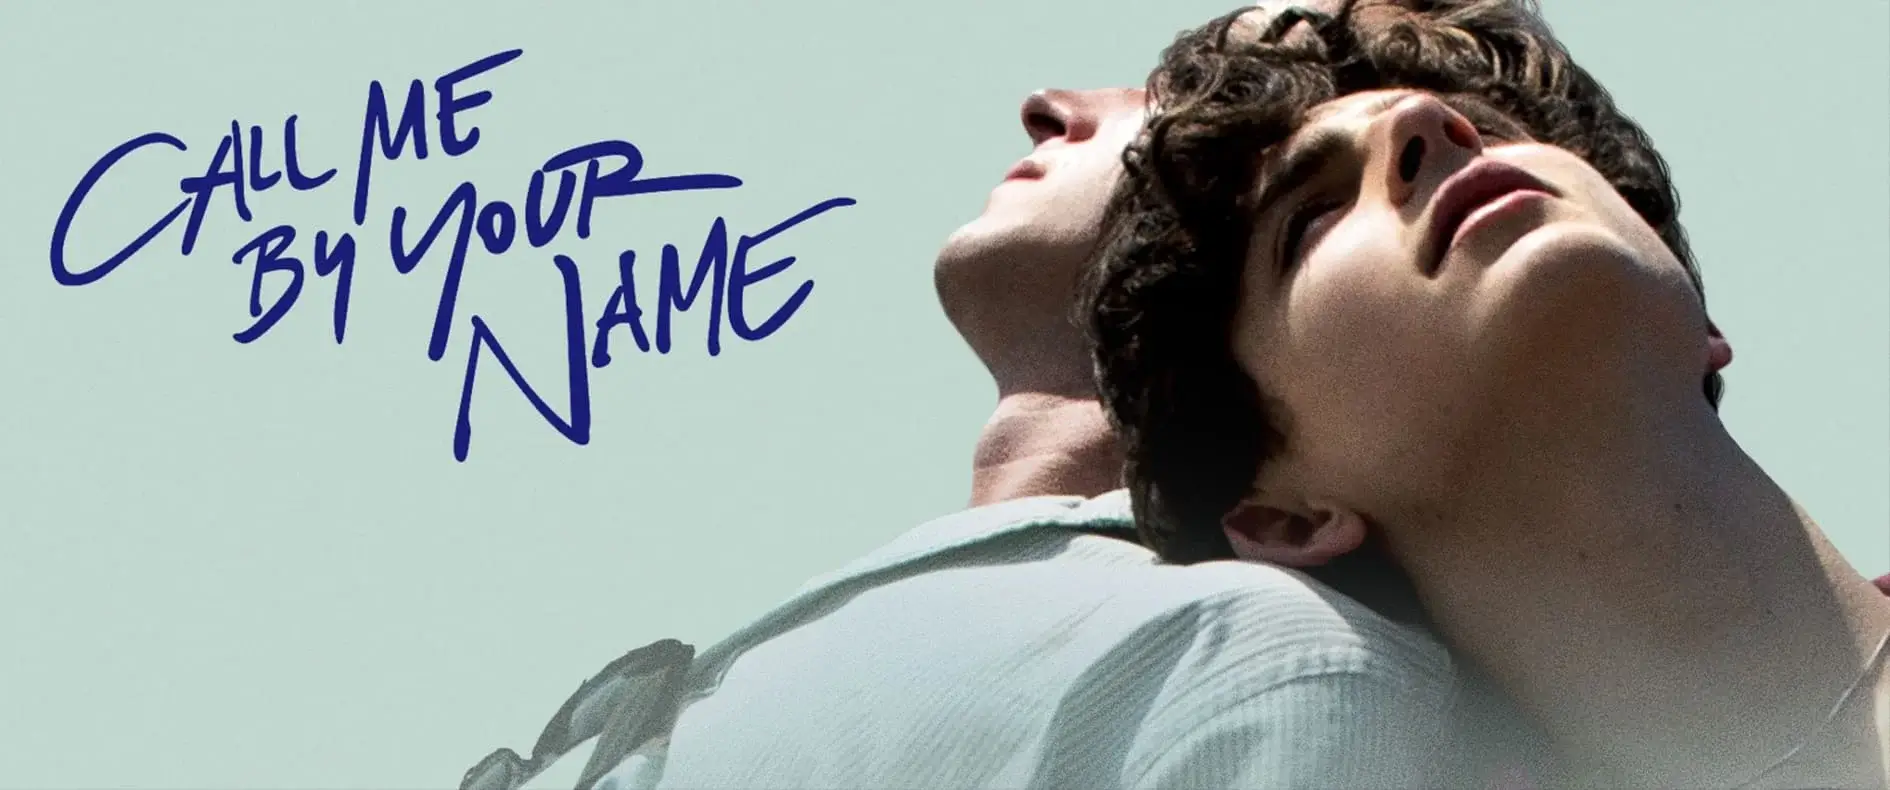 Call Me by Your Name 4K 2017 big poster